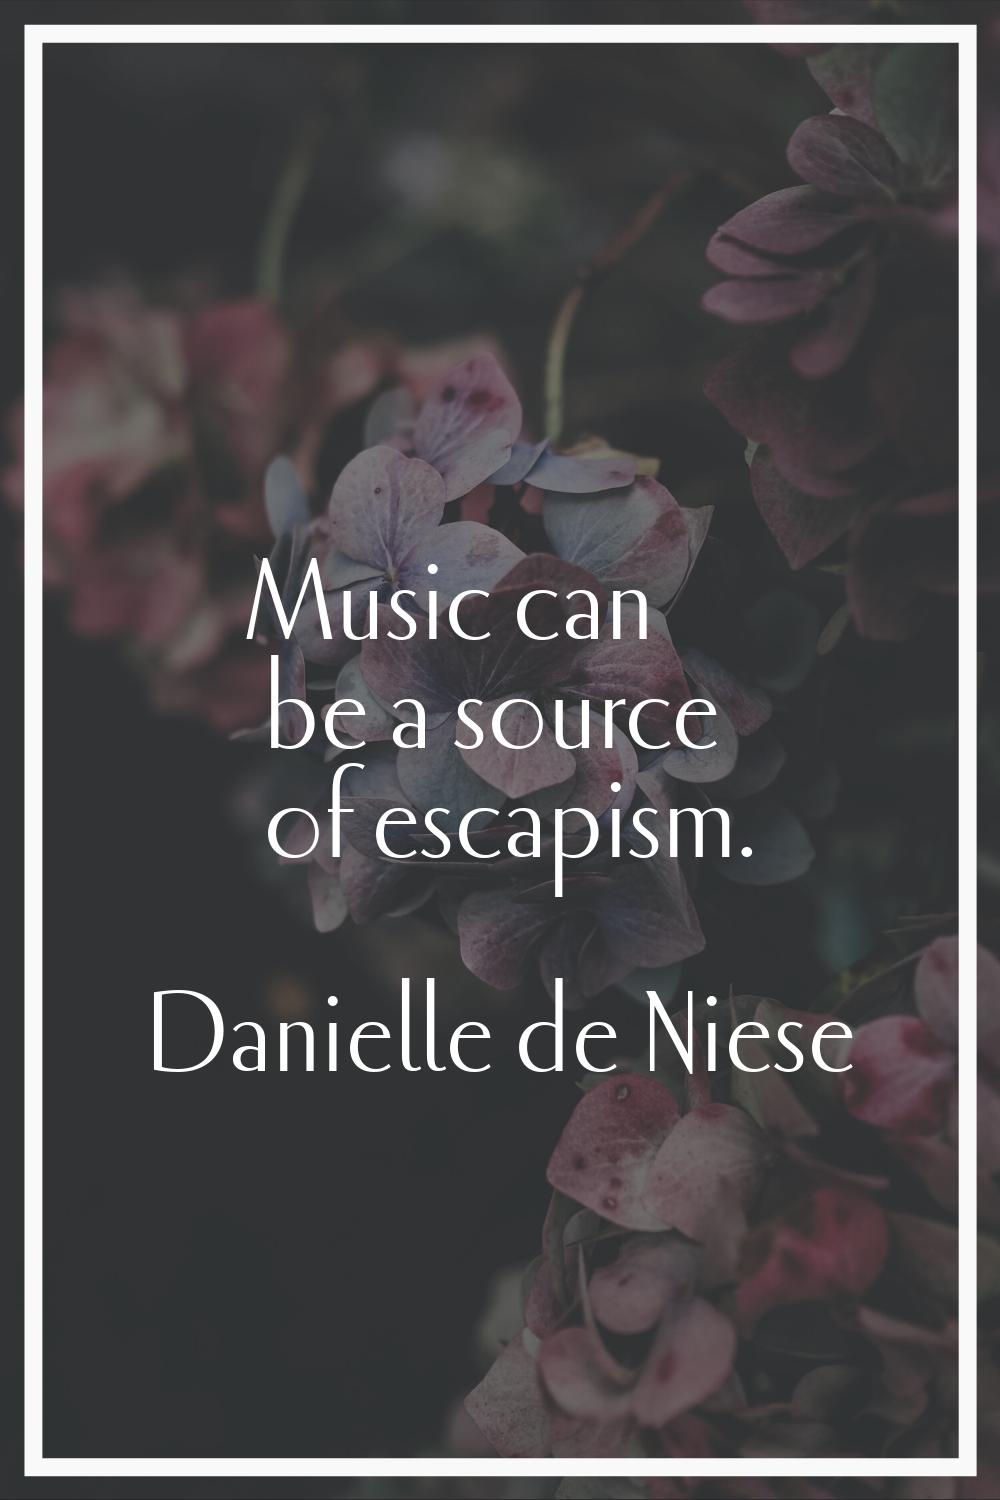 Music can be a source of escapism.